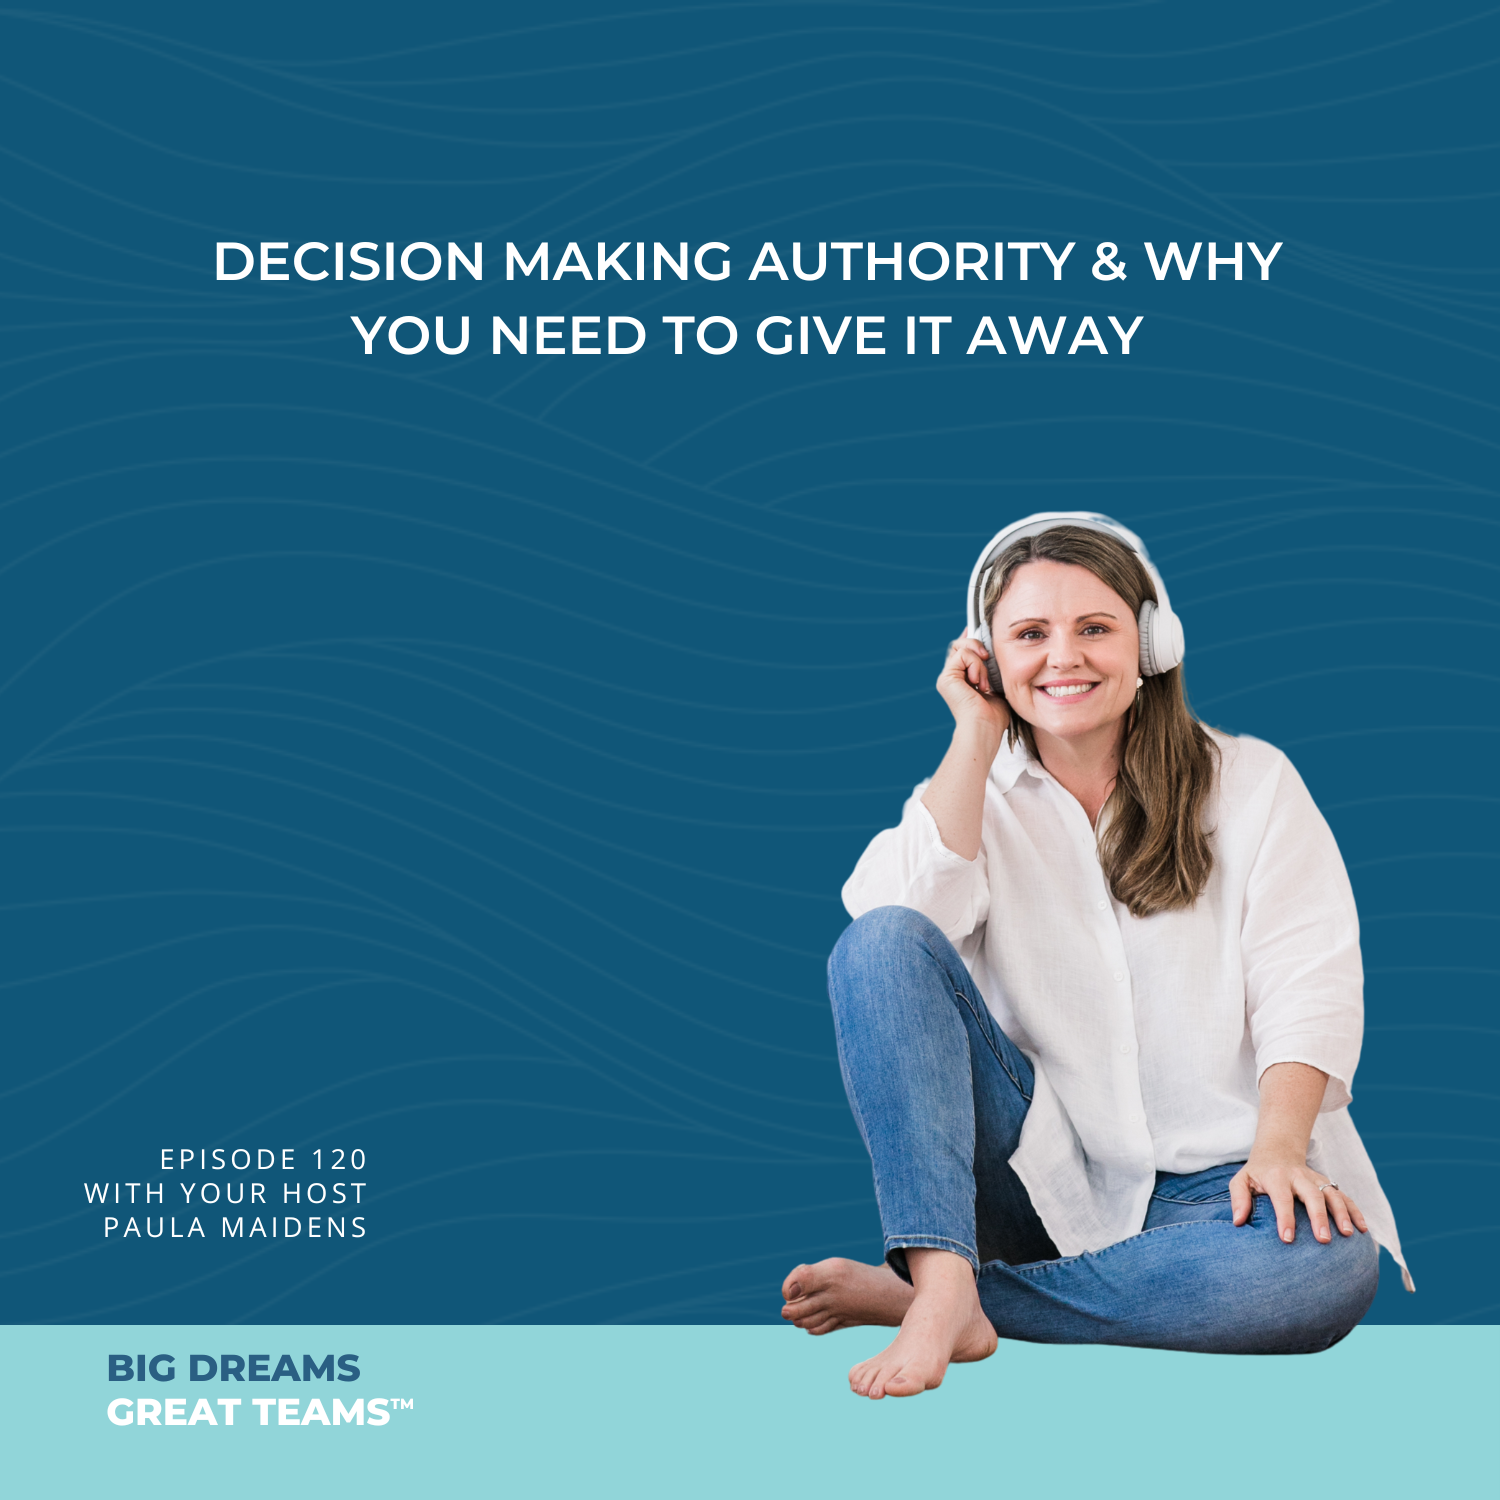 Episode 120 - Decision Making Authority & Why You Need To Give It Away